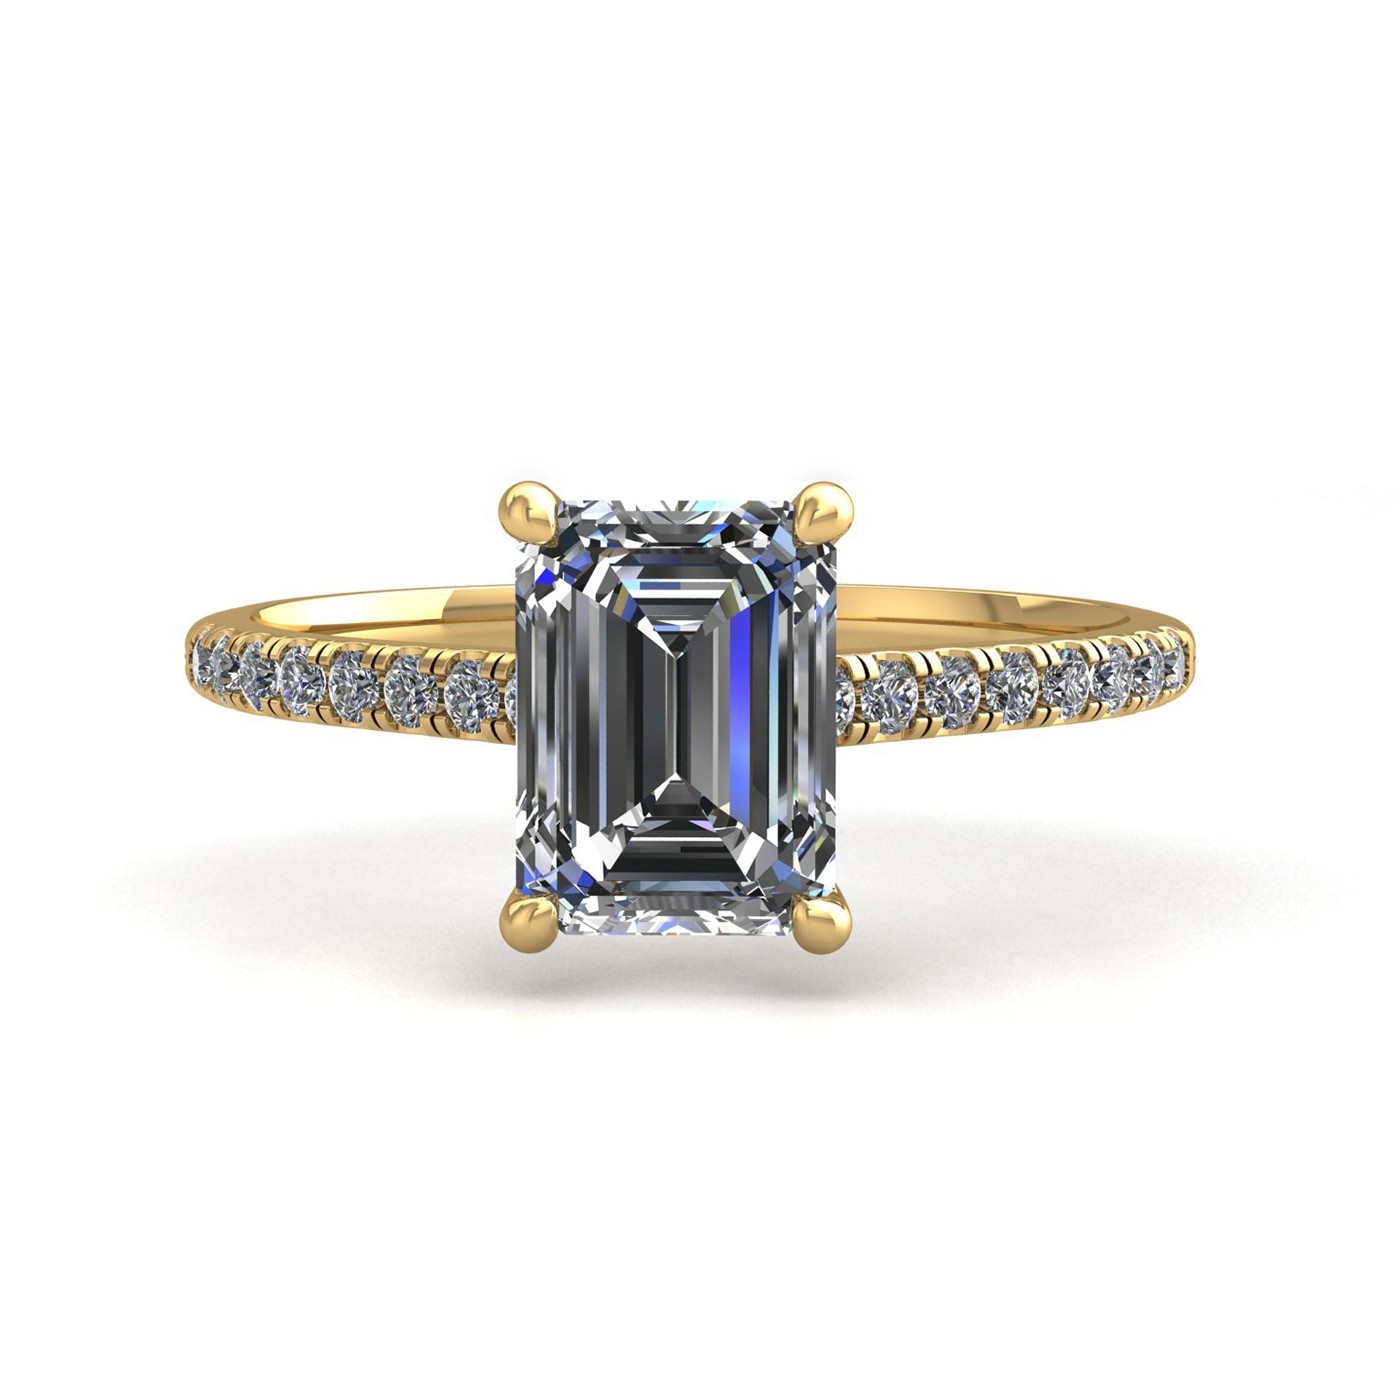 18k yellow gold 2.5ct 4 prongs emerald cut diamond engagement ring with whisper thin pavÉ set band Photos & images